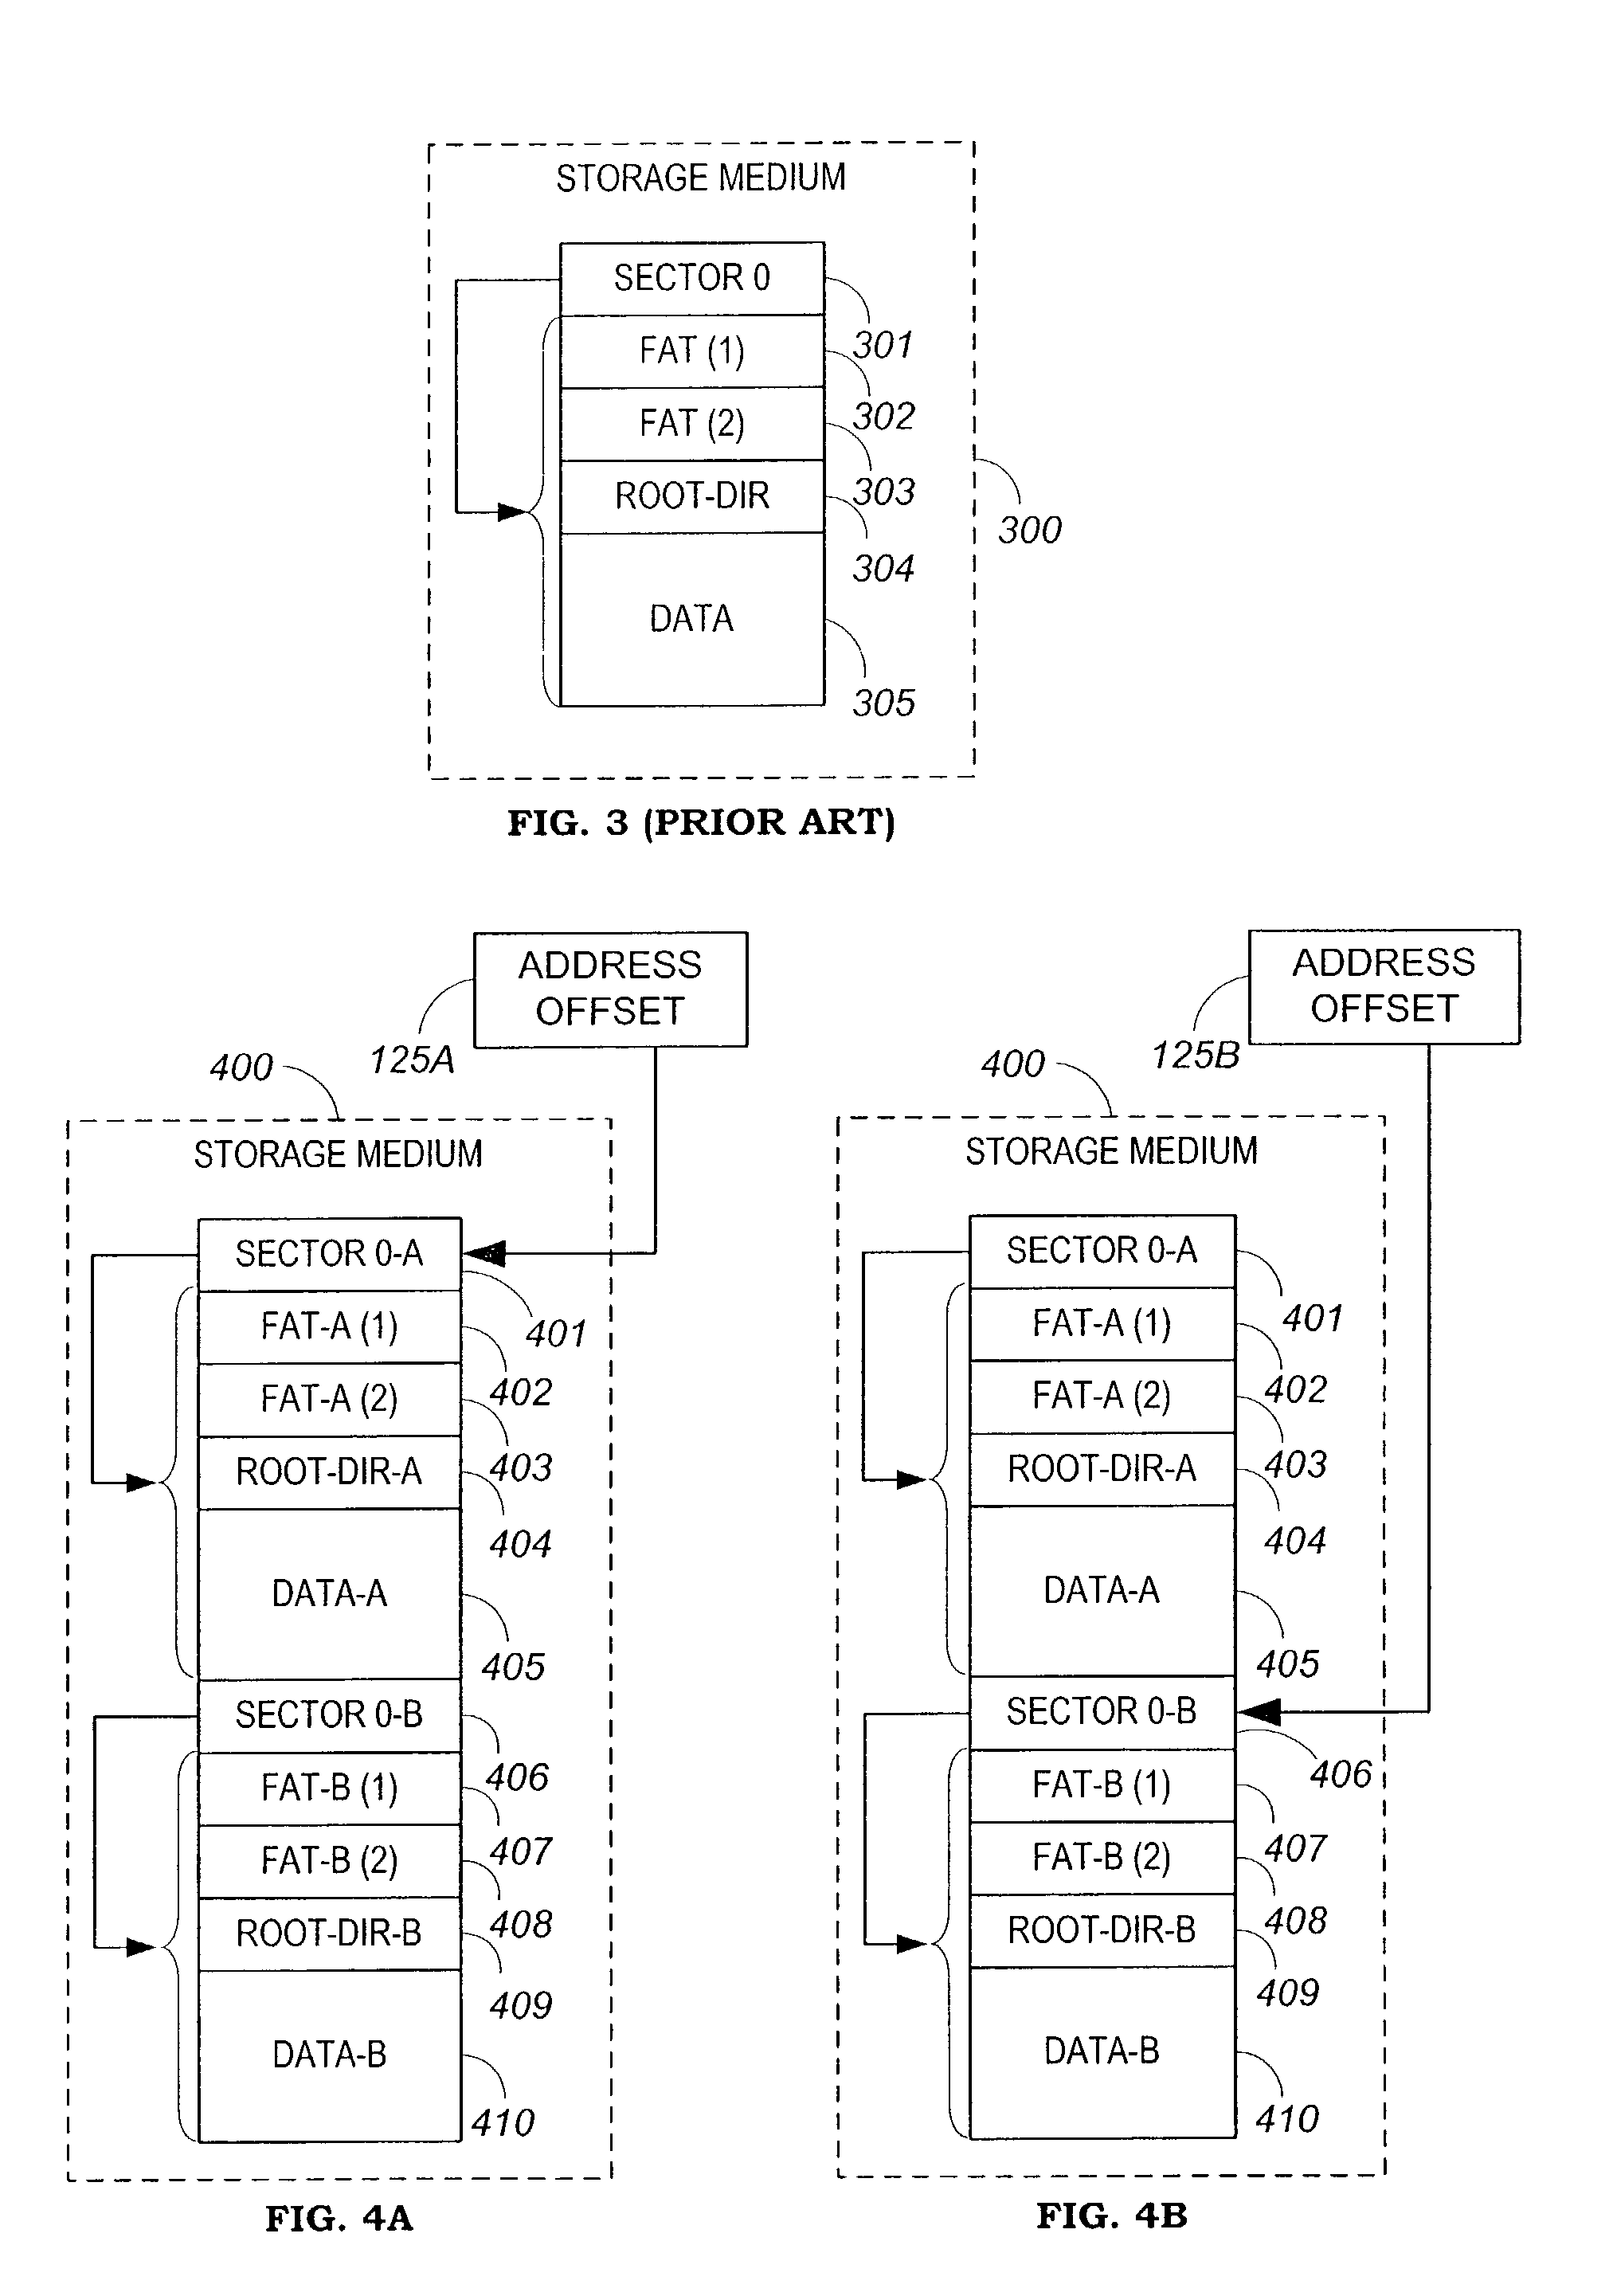 Apparatus and method for securing data on a portable storage device